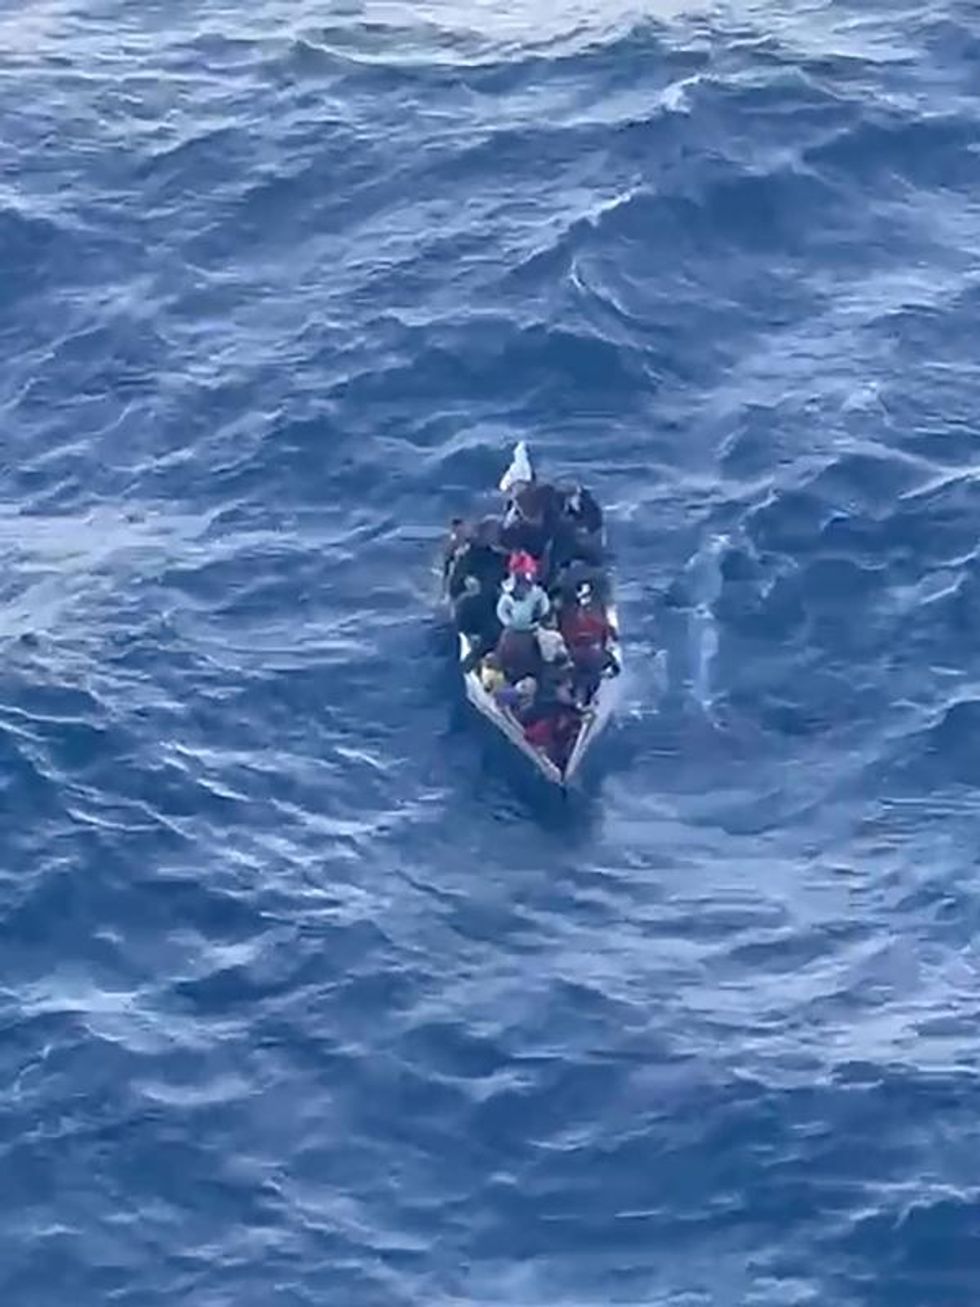 migrants packed into a small boat on the ocean